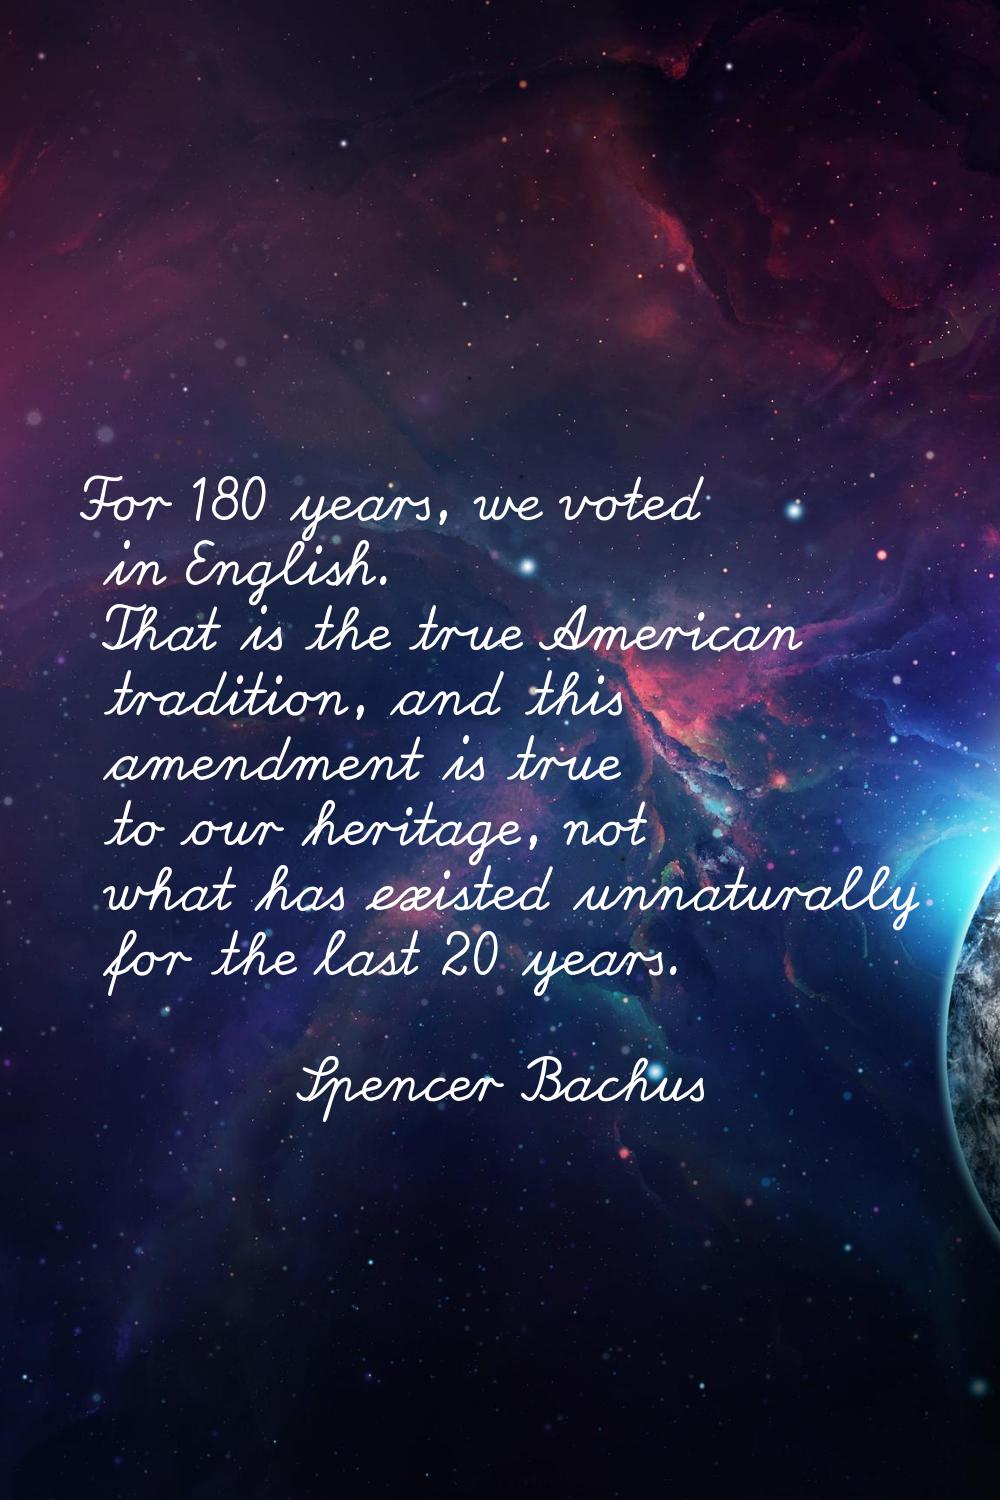 For 180 years, we voted in English. That is the true American tradition, and this amendment is true